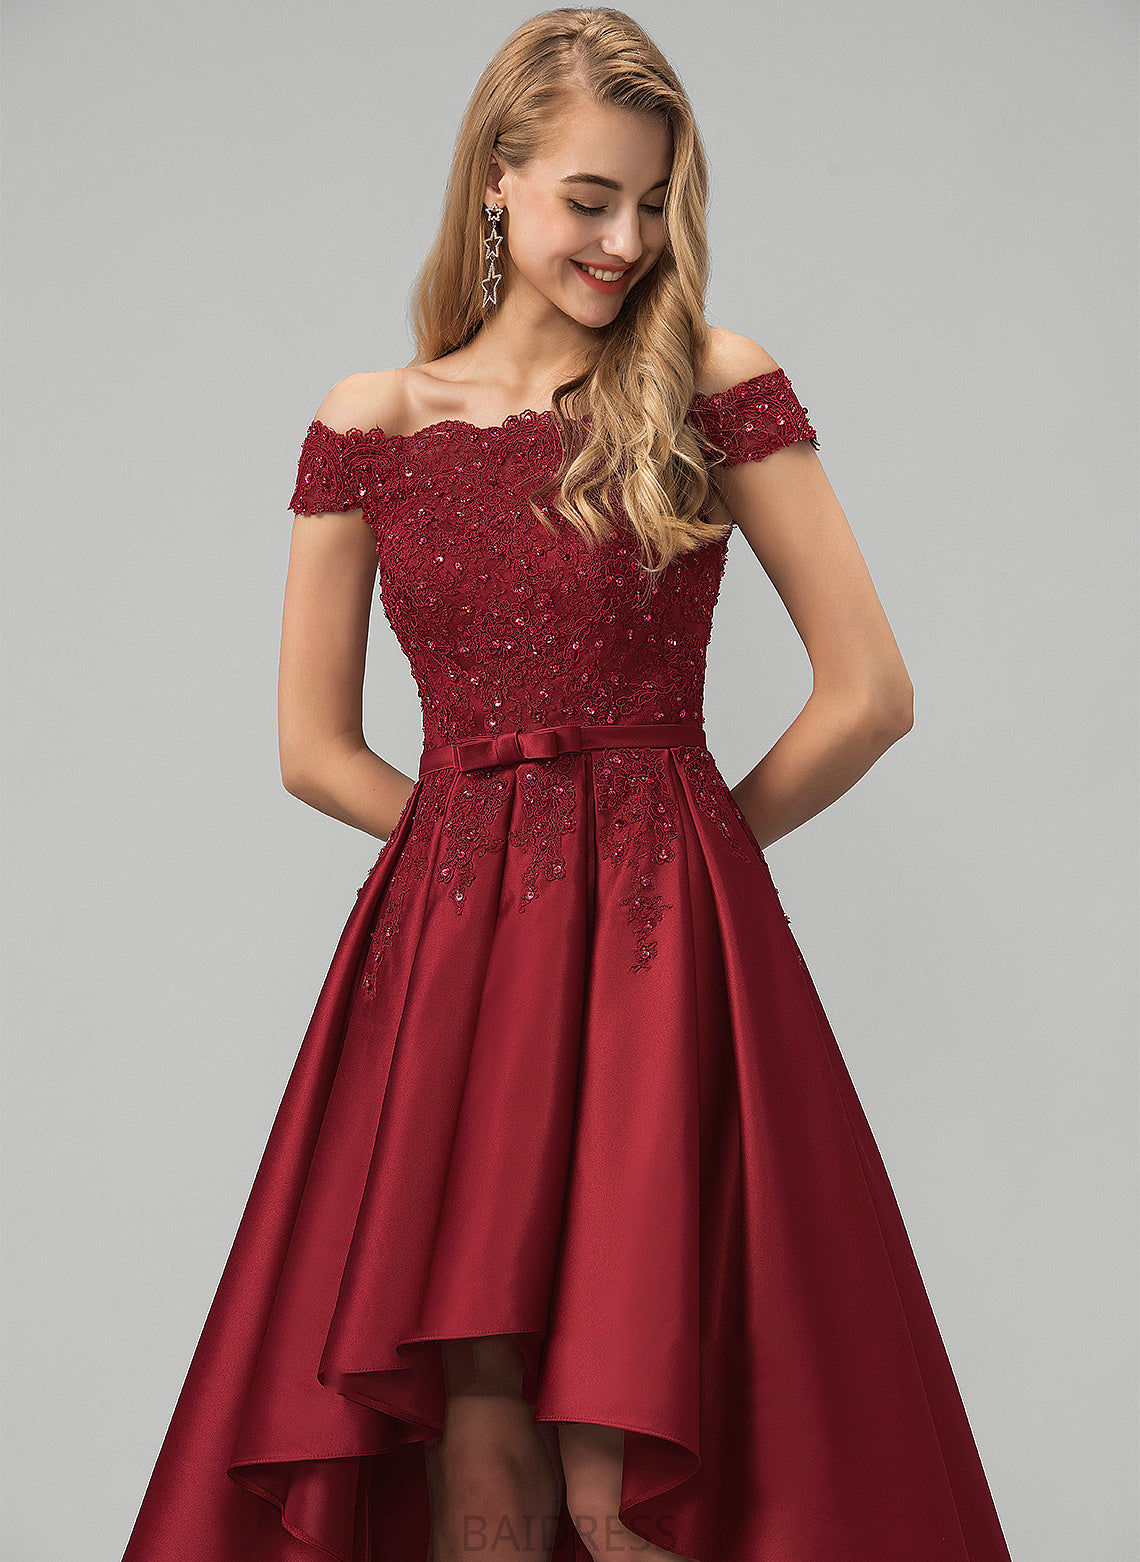 Ball-Gown/Princess Prom Dresses With Asymmetrical Off-the-Shoulder Satin Sequins Beading Bow(s) Lace Allie